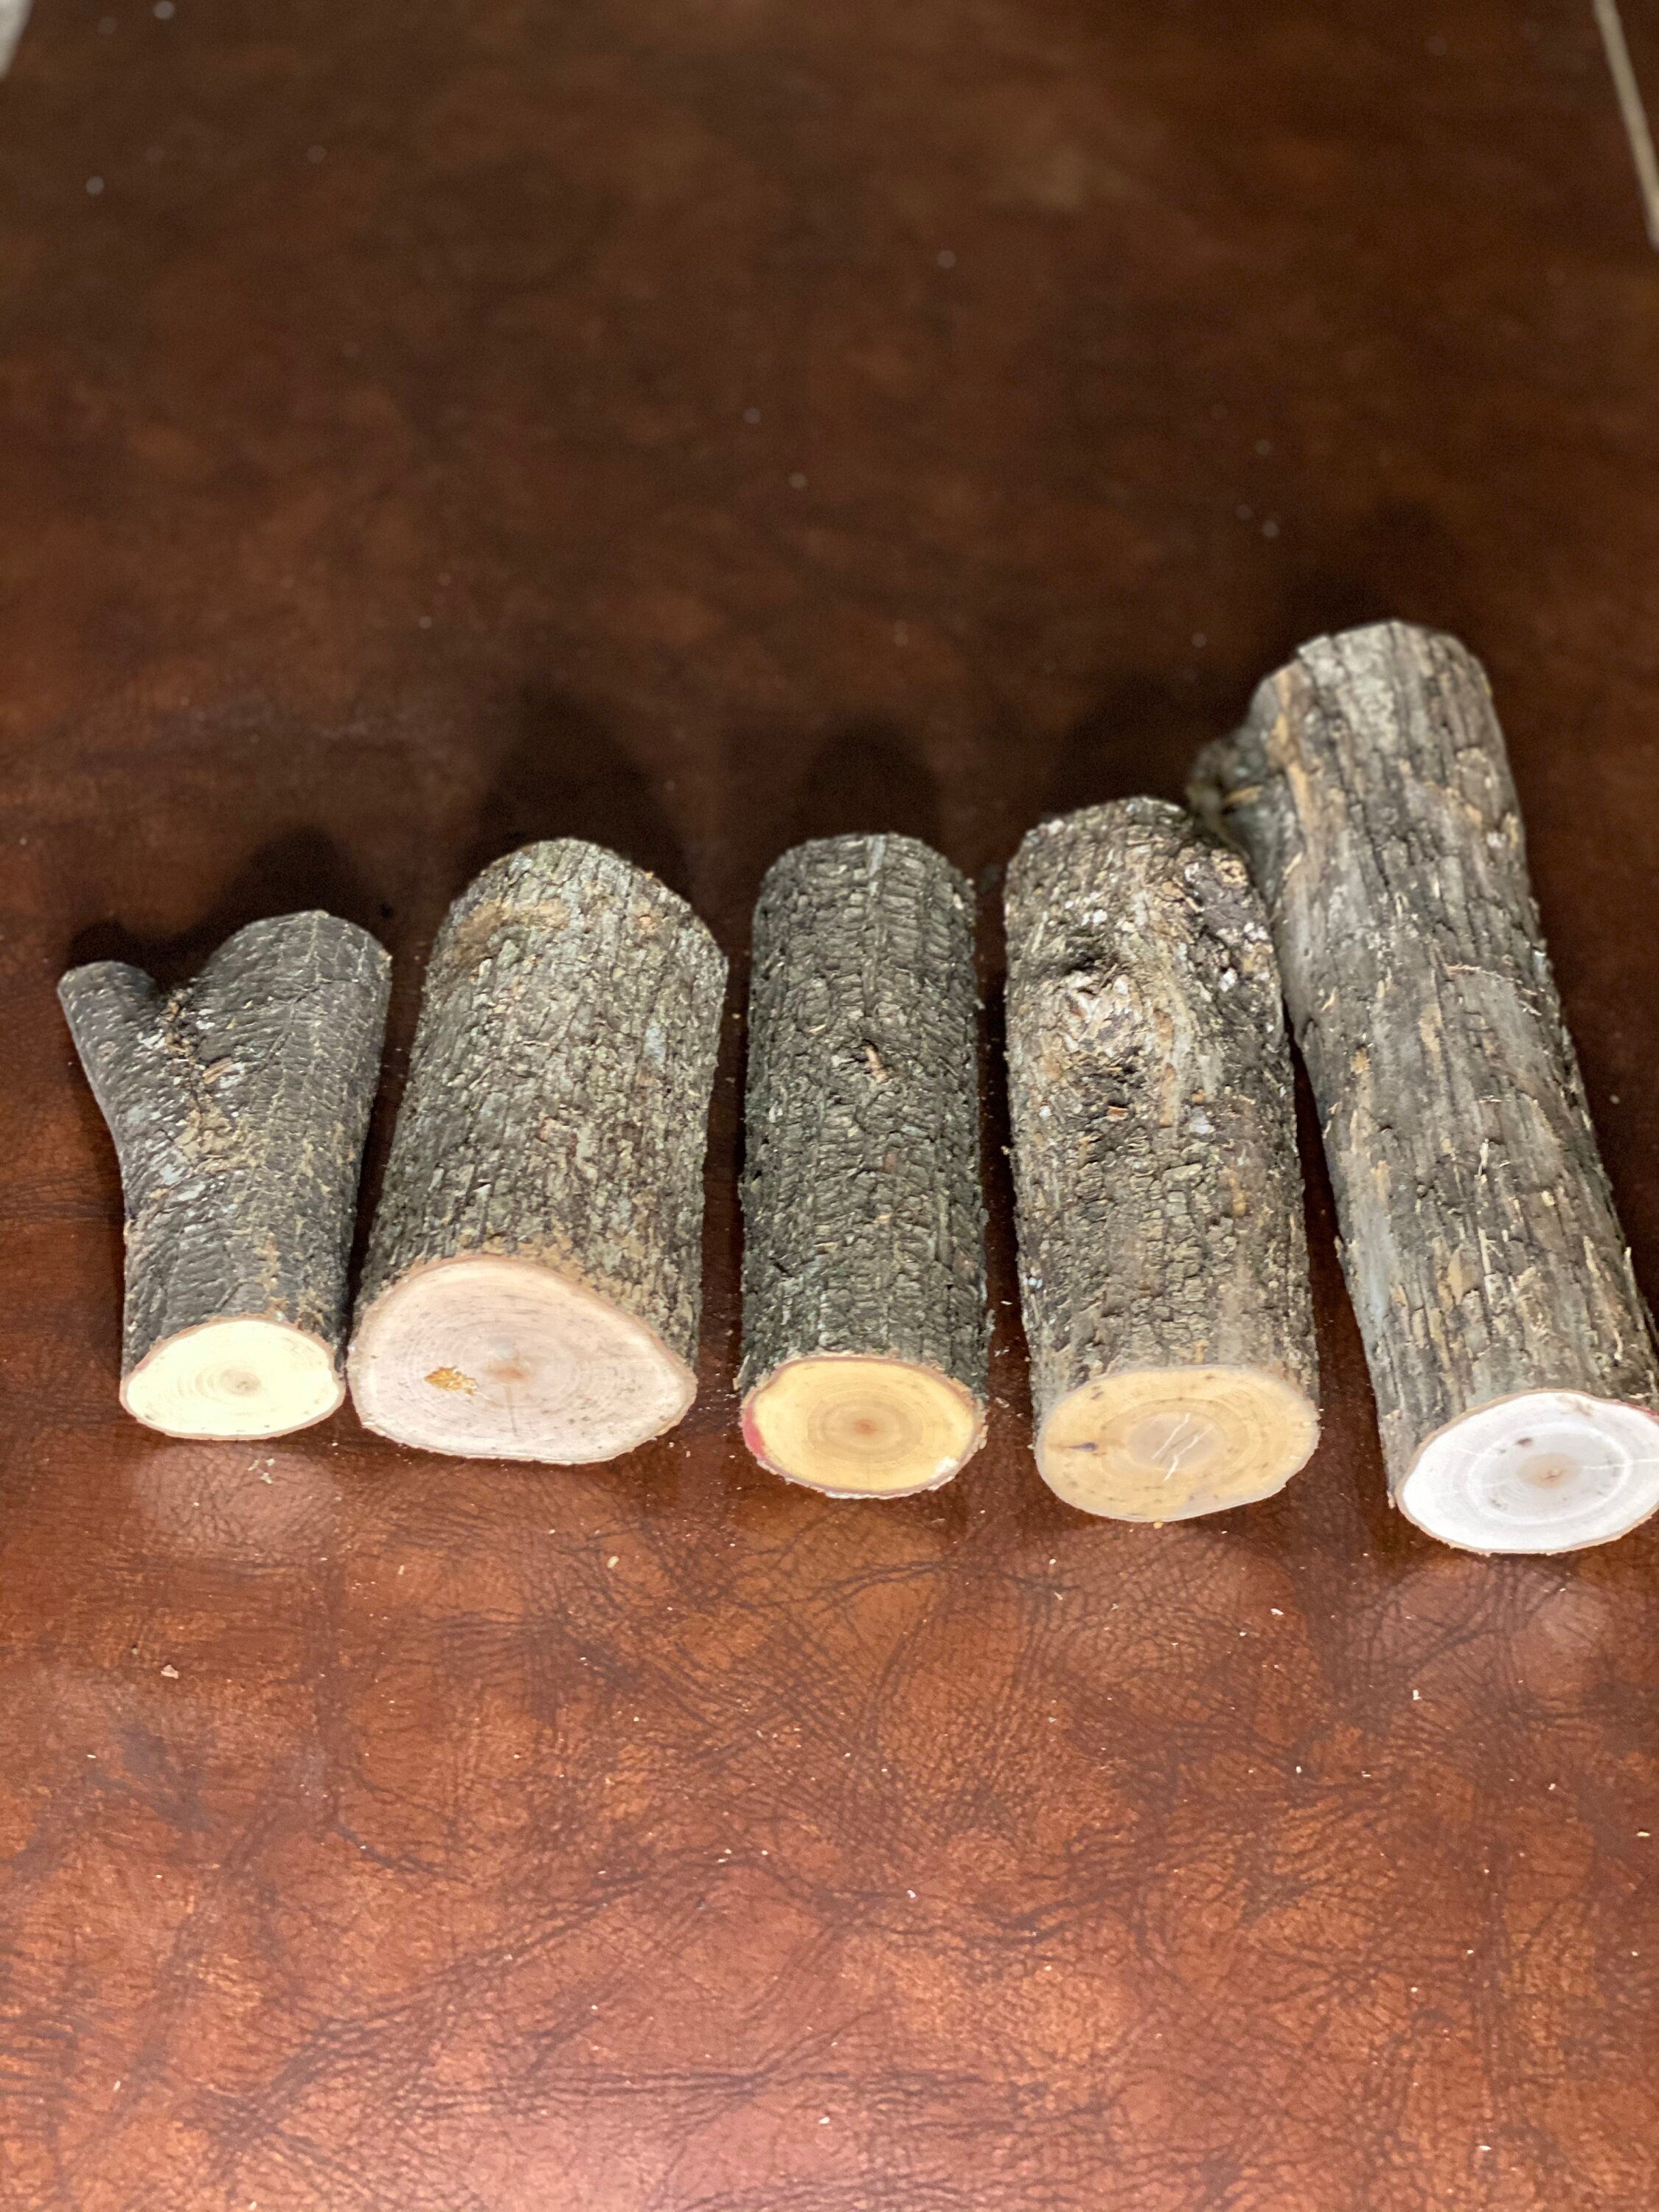 Ironwood Logs, Hophornbeam Ends and Pieces, 5 Count, Approximately 4-11 Inches Long and About 1-4 Inches Diameter